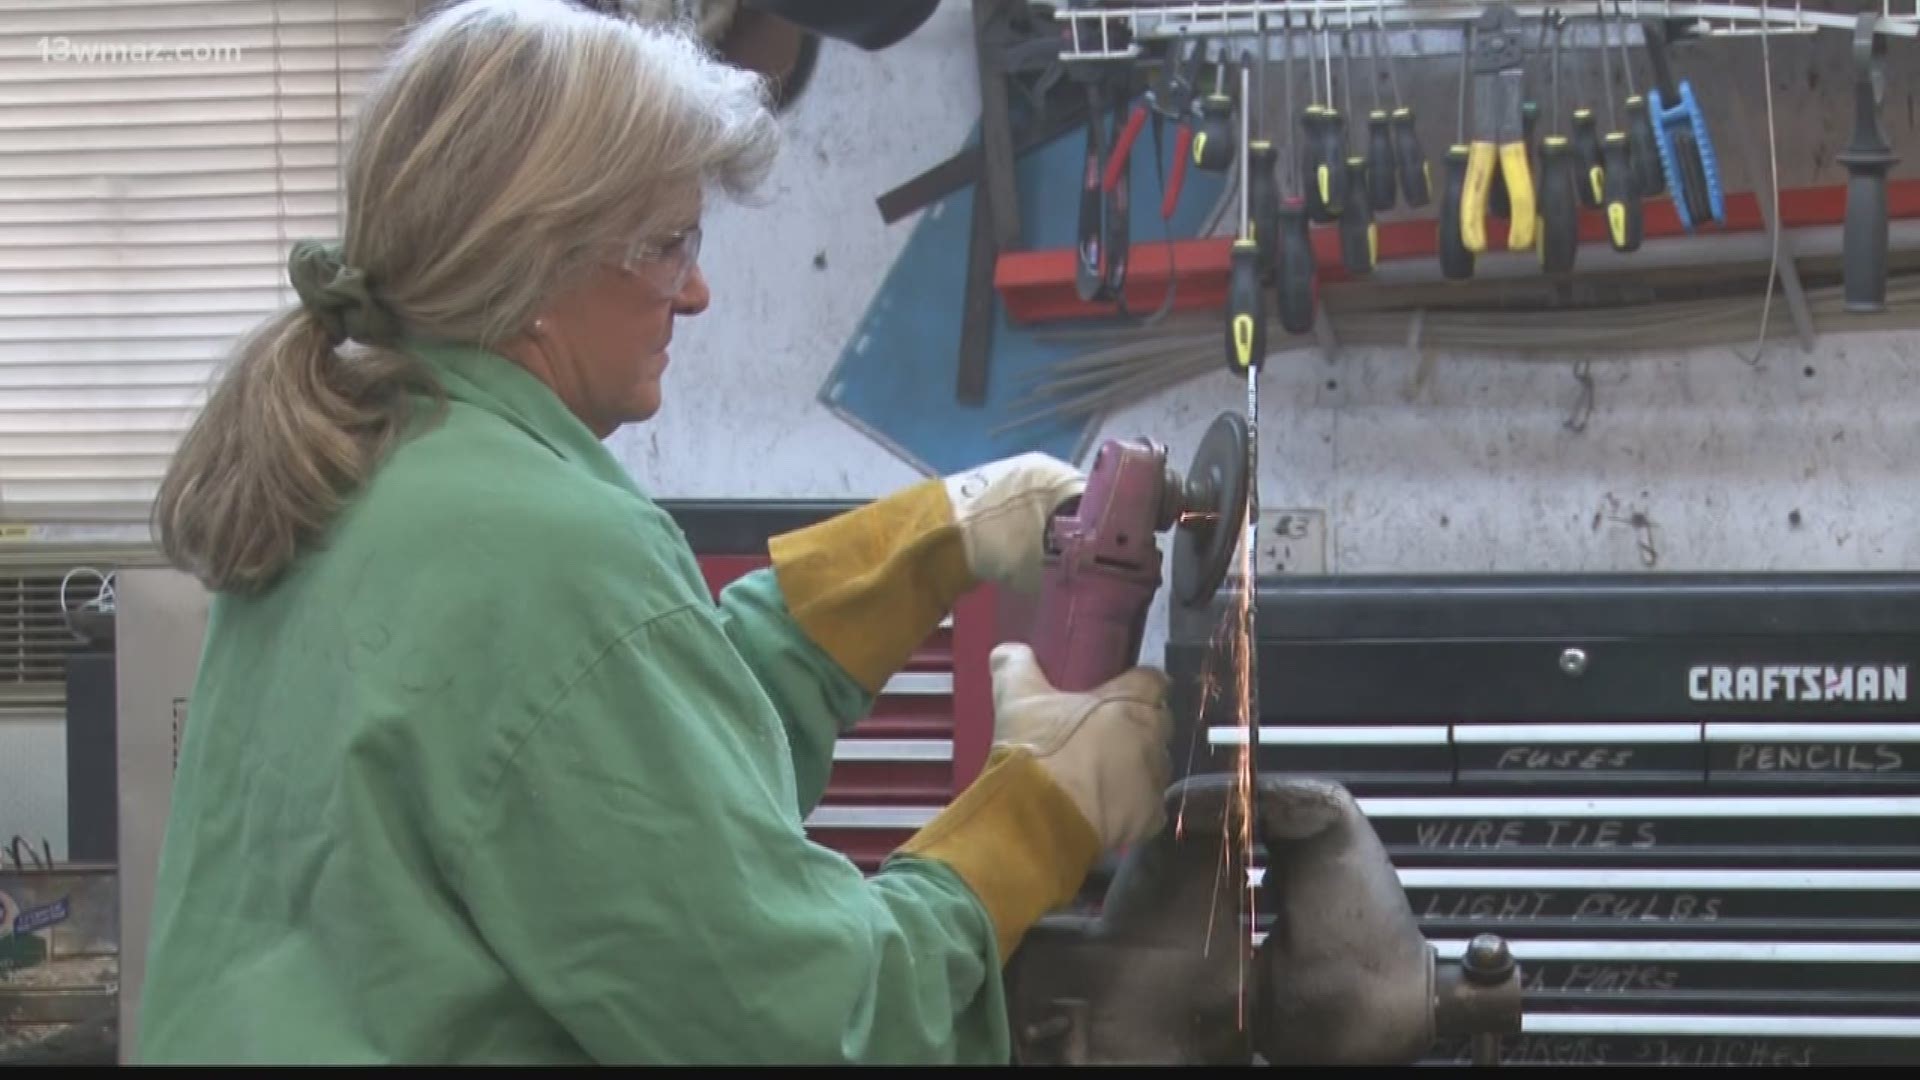 One Macon woman defied the odds and decided to pursue a welding career over four decades ago. Today, Carol McKinley is inspiring other women in trade fields to keep striving for their dreams.